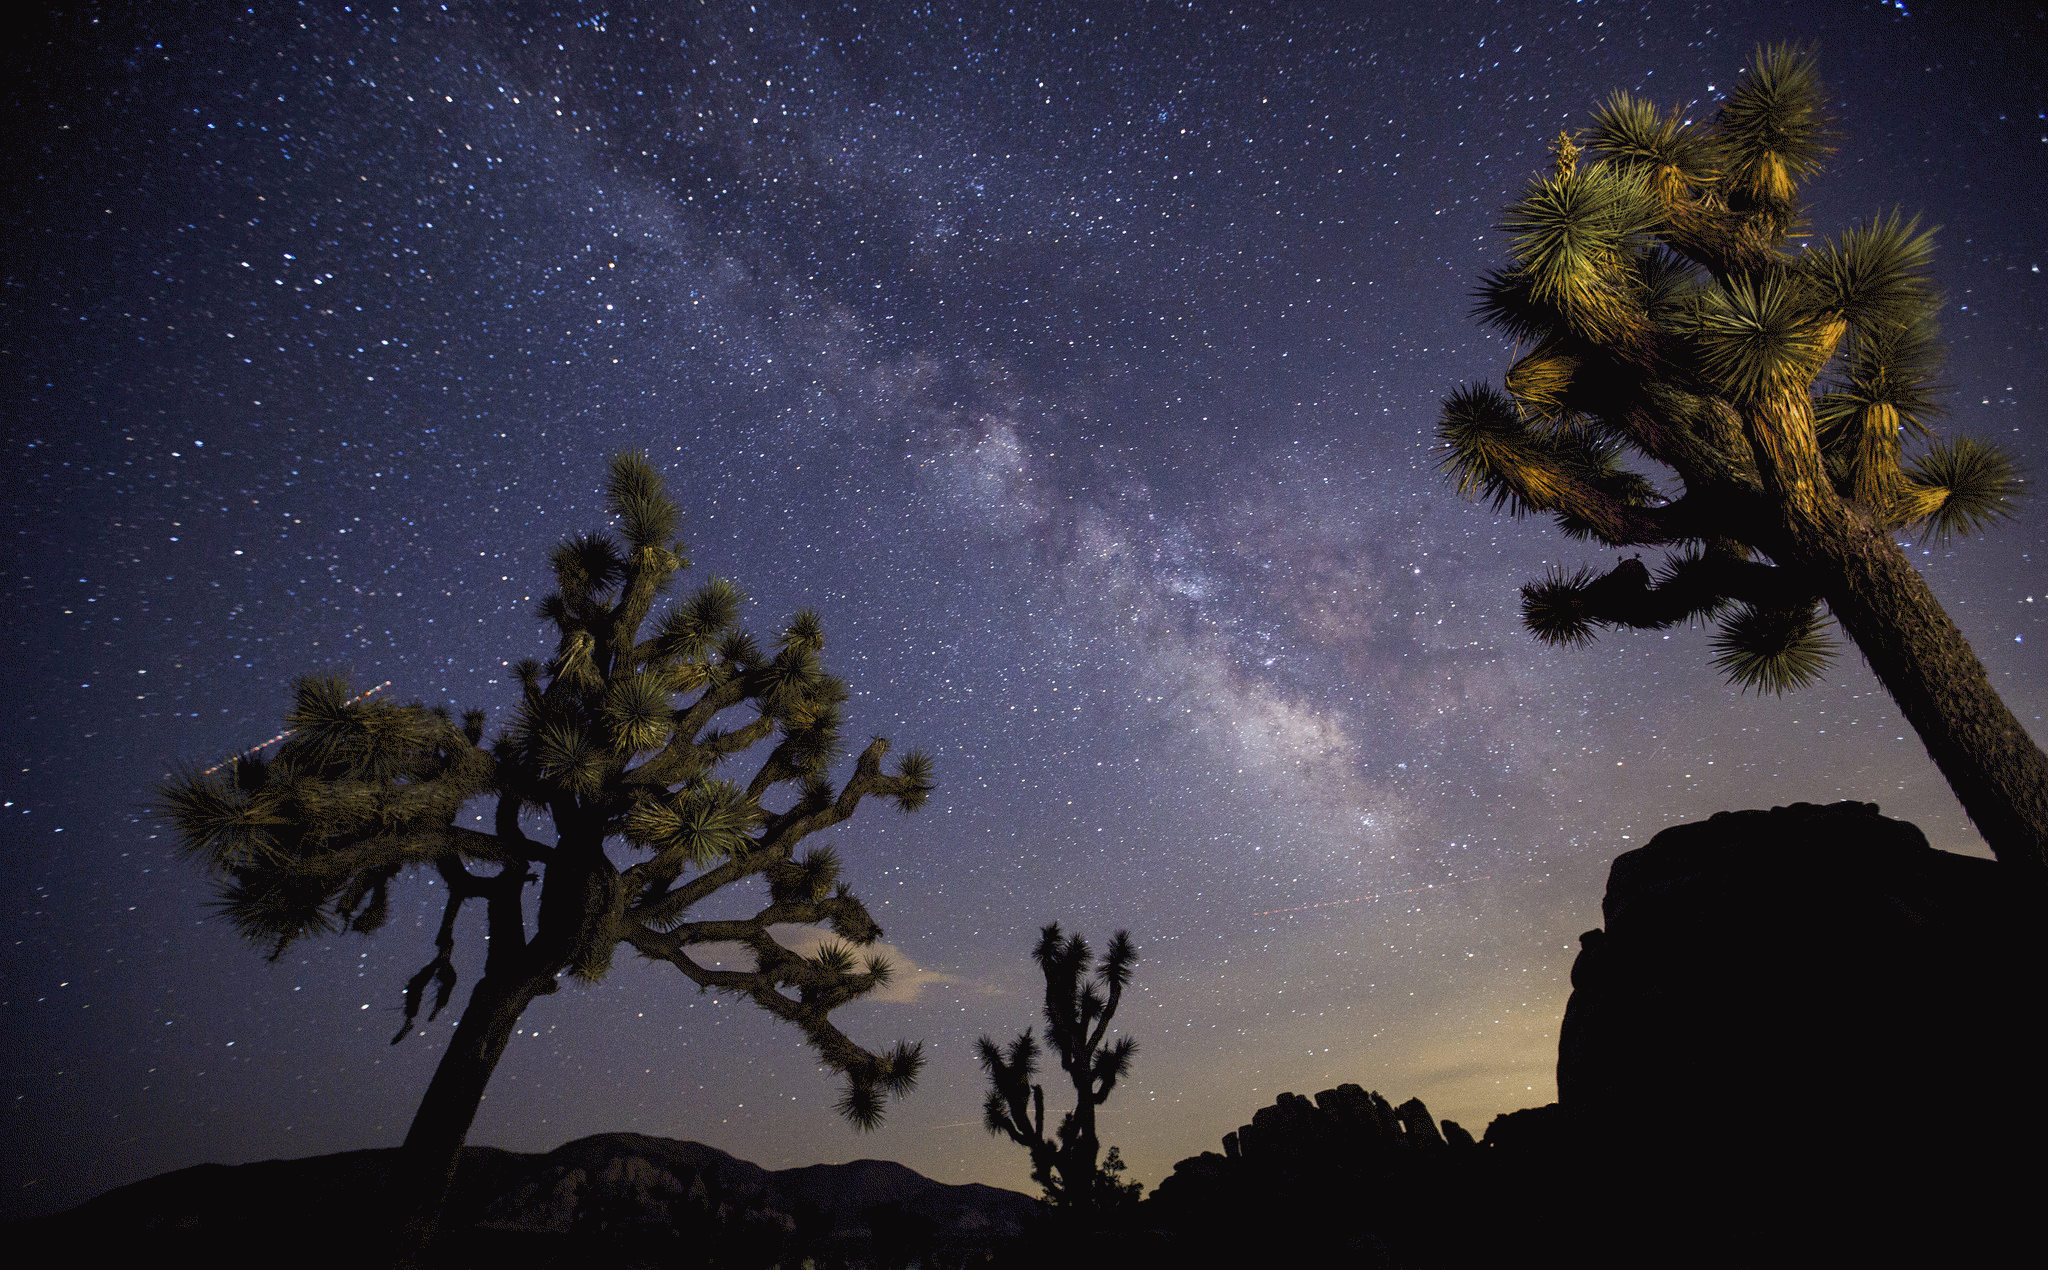 A view of the Milky Way arching over Joshua trees and rocks just after dark.